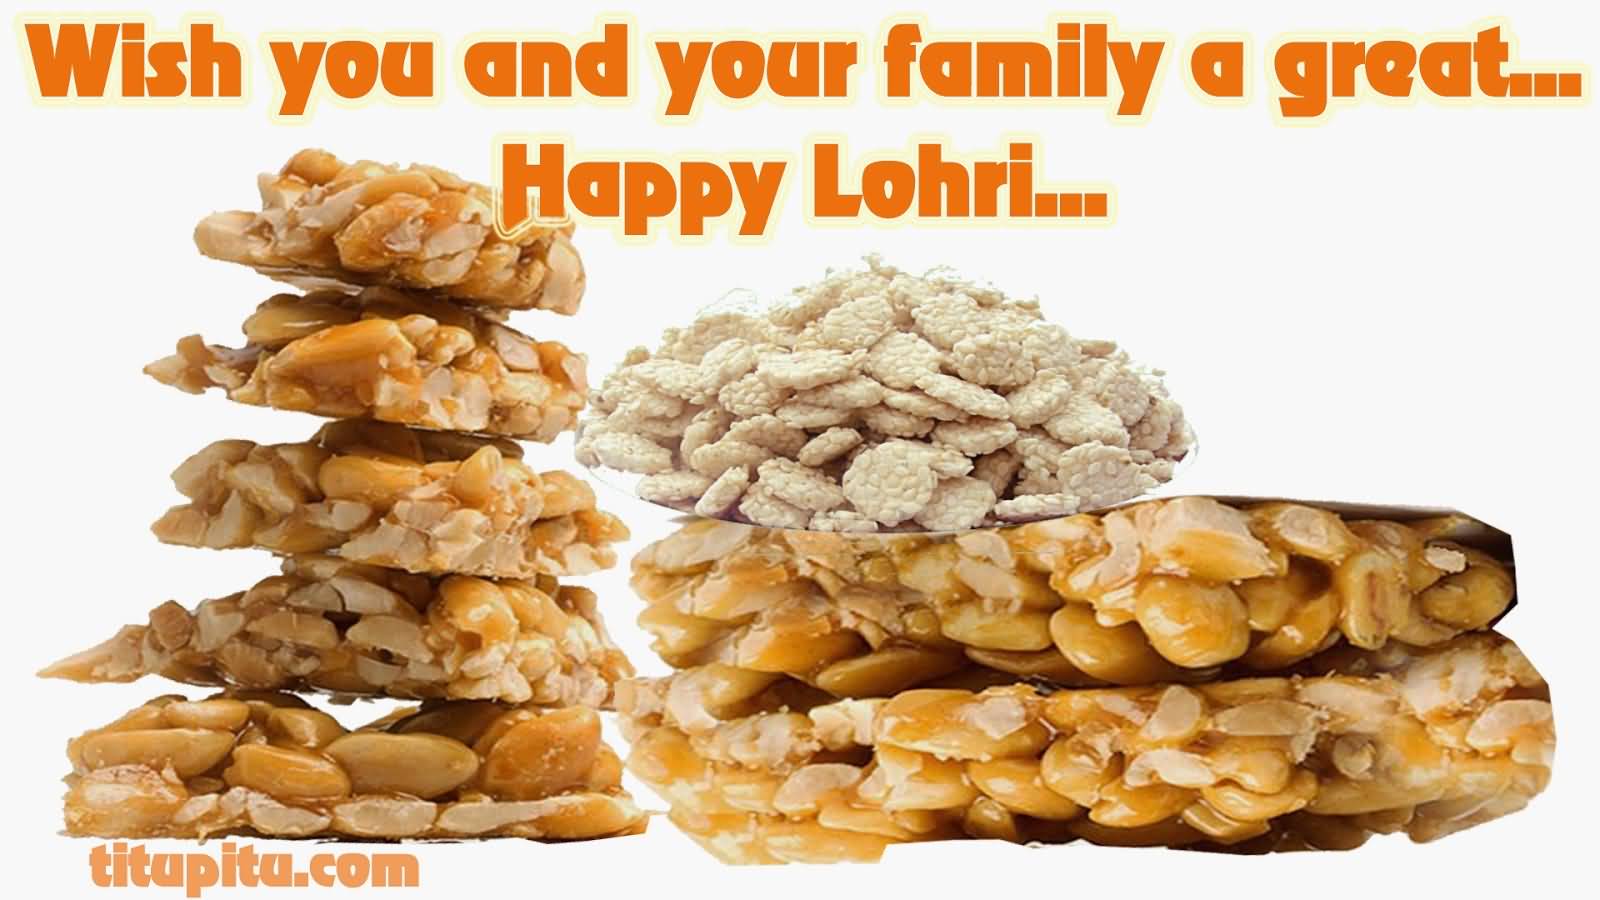 Wish You And Your Family A Great Happy Lohri